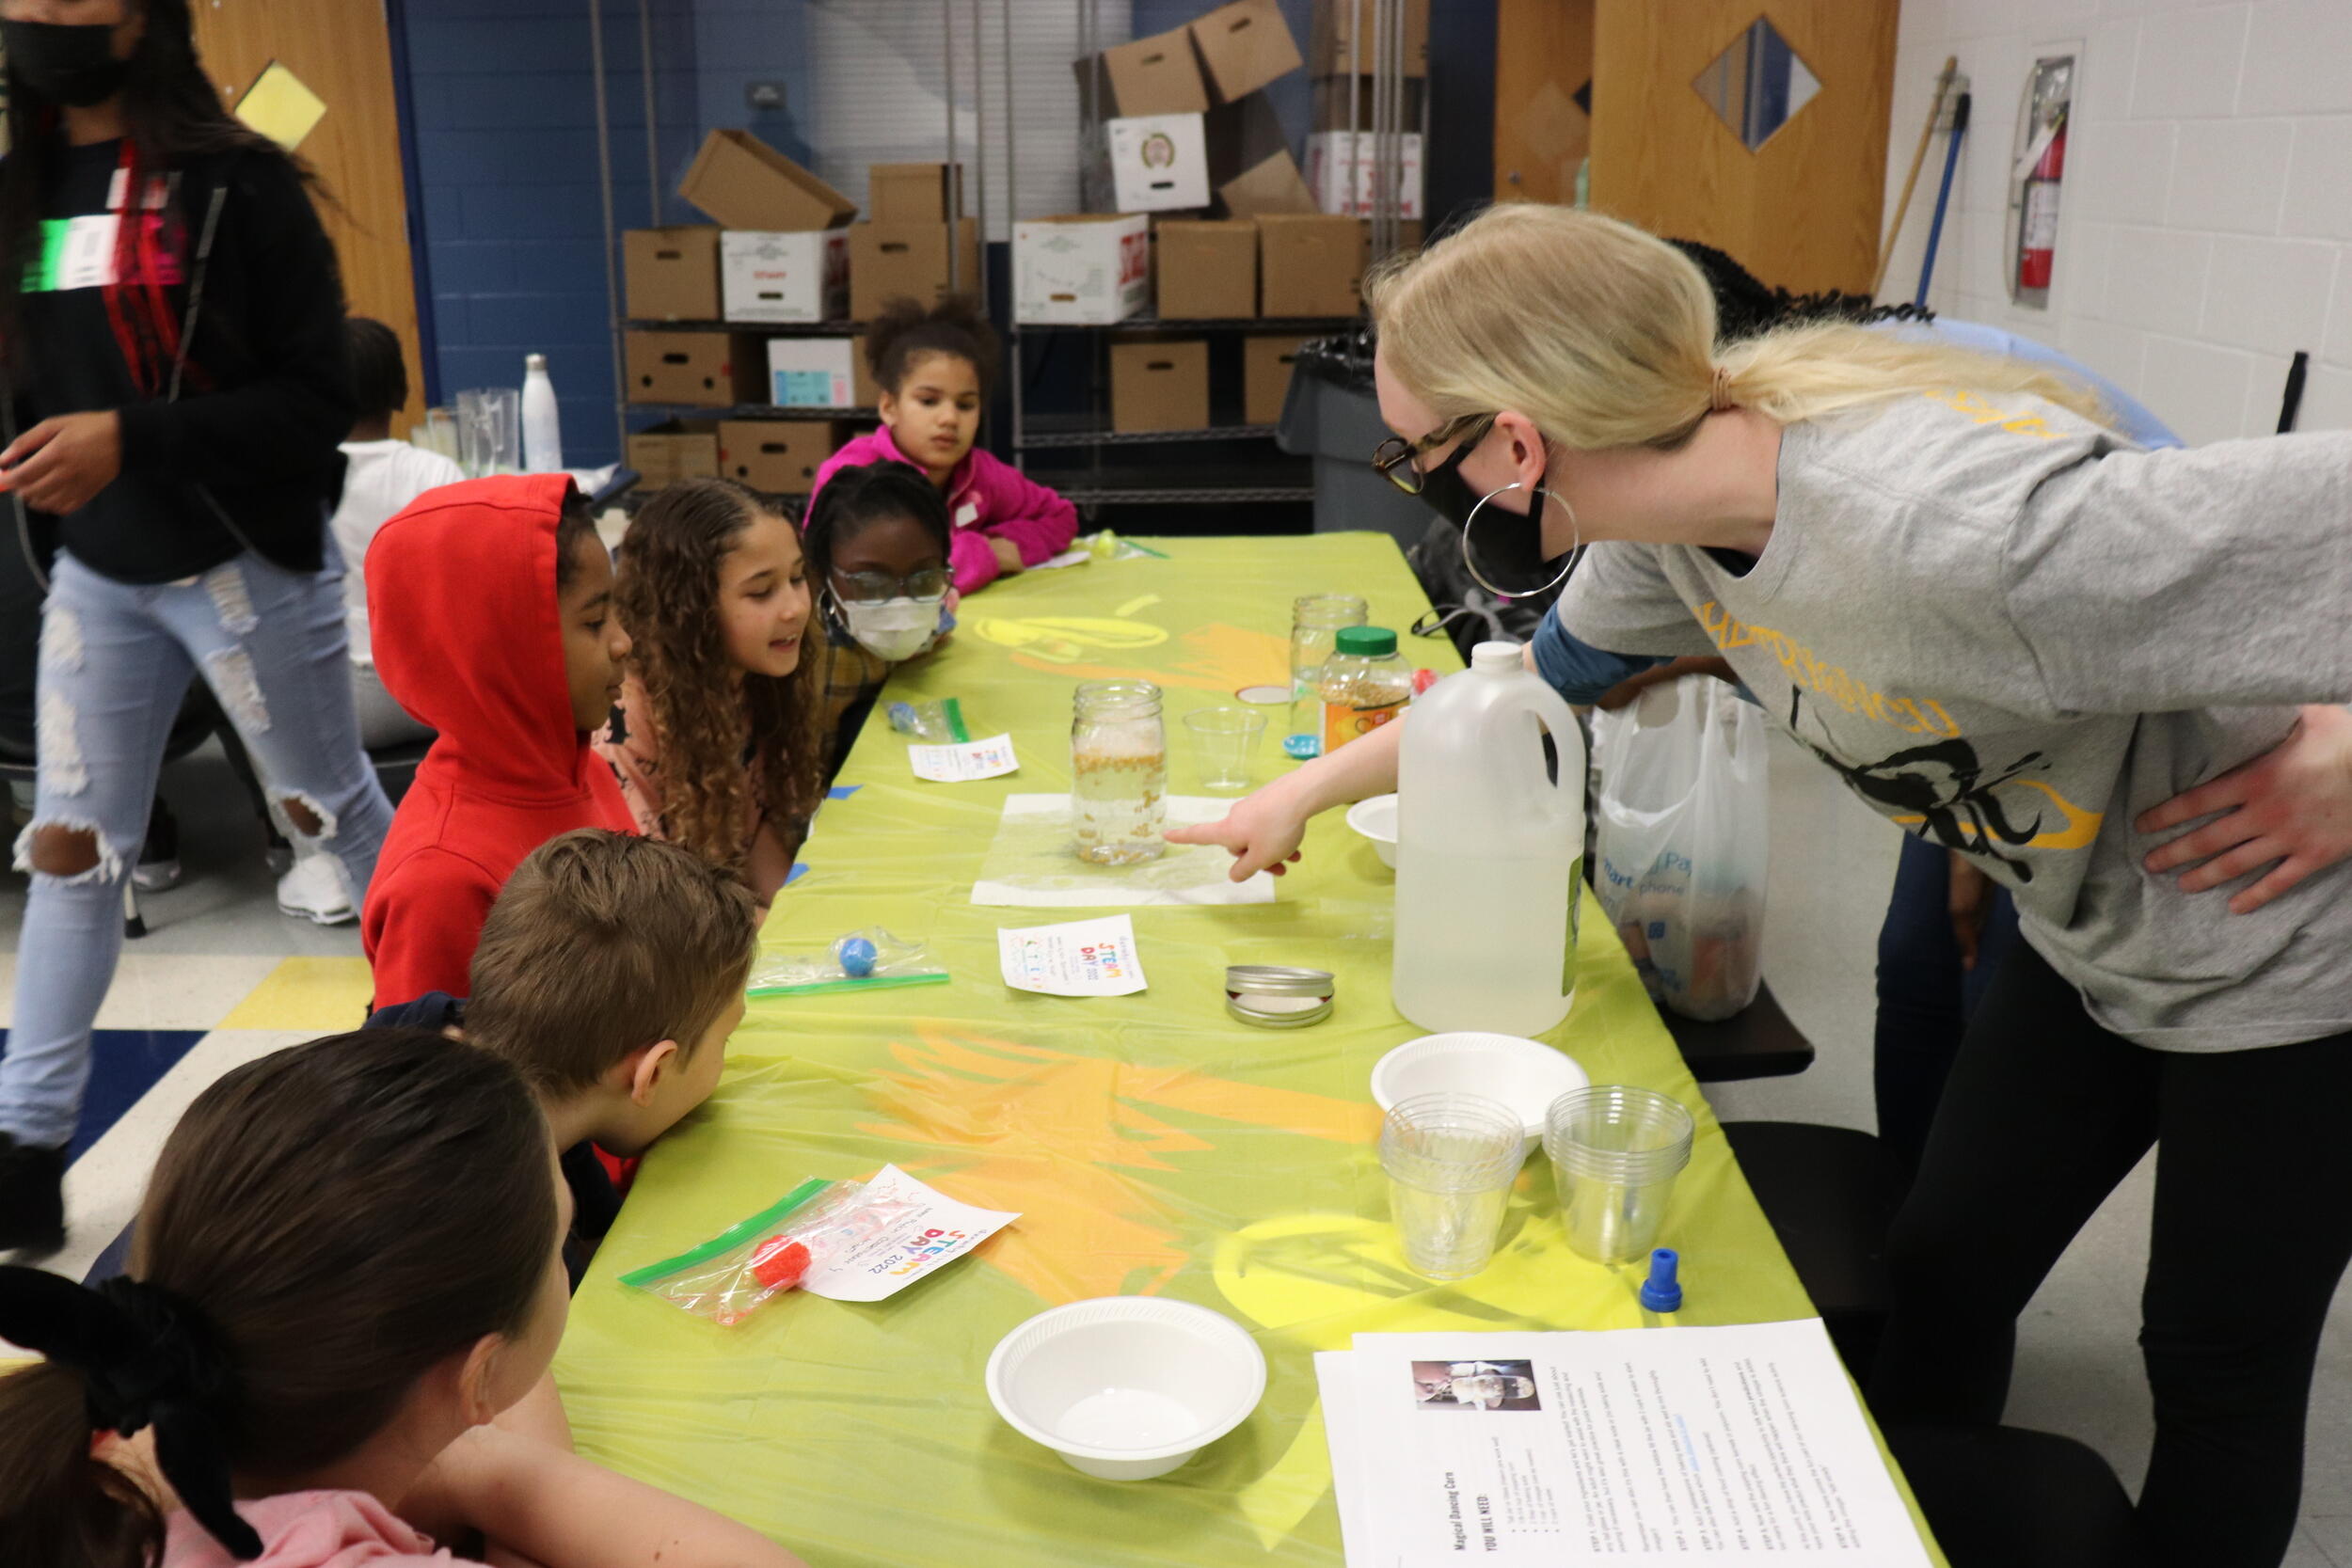 A VCU student showing elementary school students a jar filled with corn, baking soda, water, and vinegar